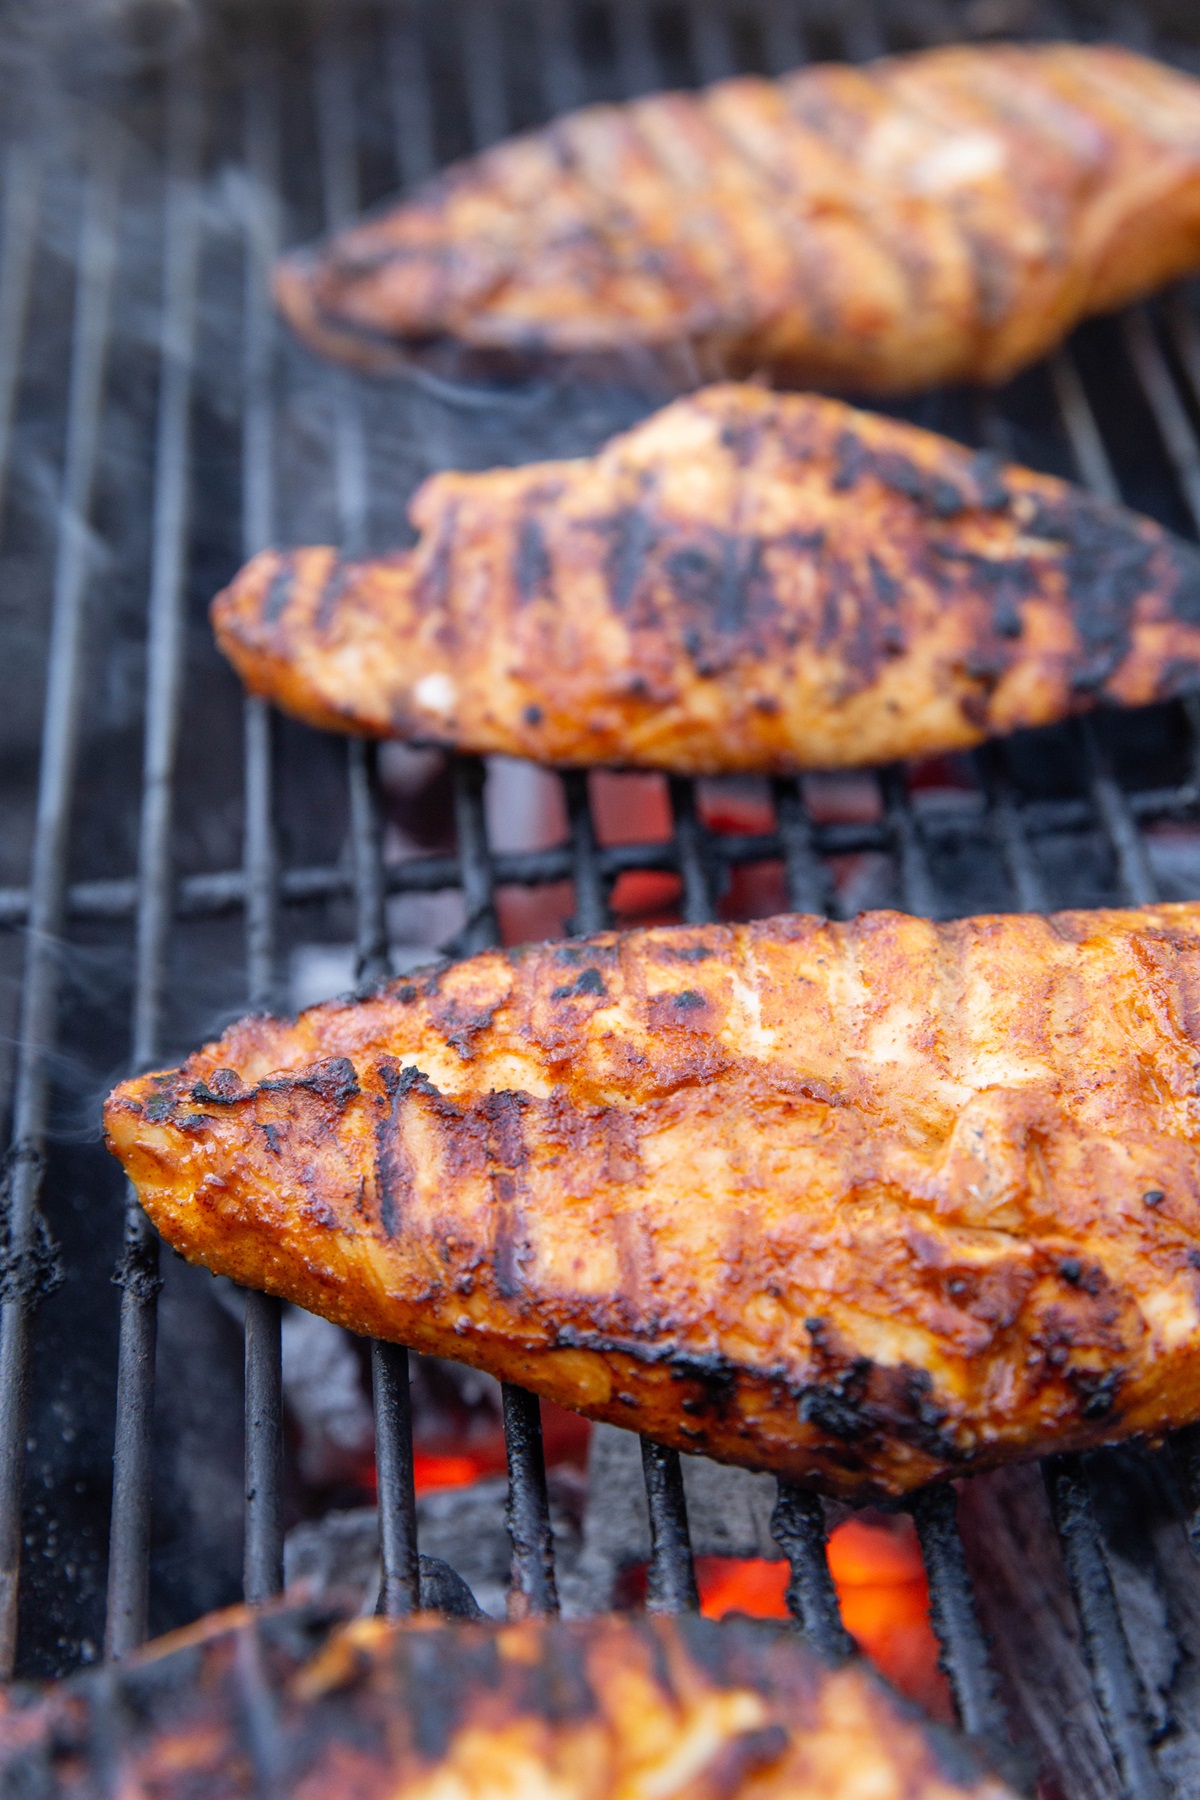 Chicken breasts grilling on a charcoal grill with coals below the grill grate.